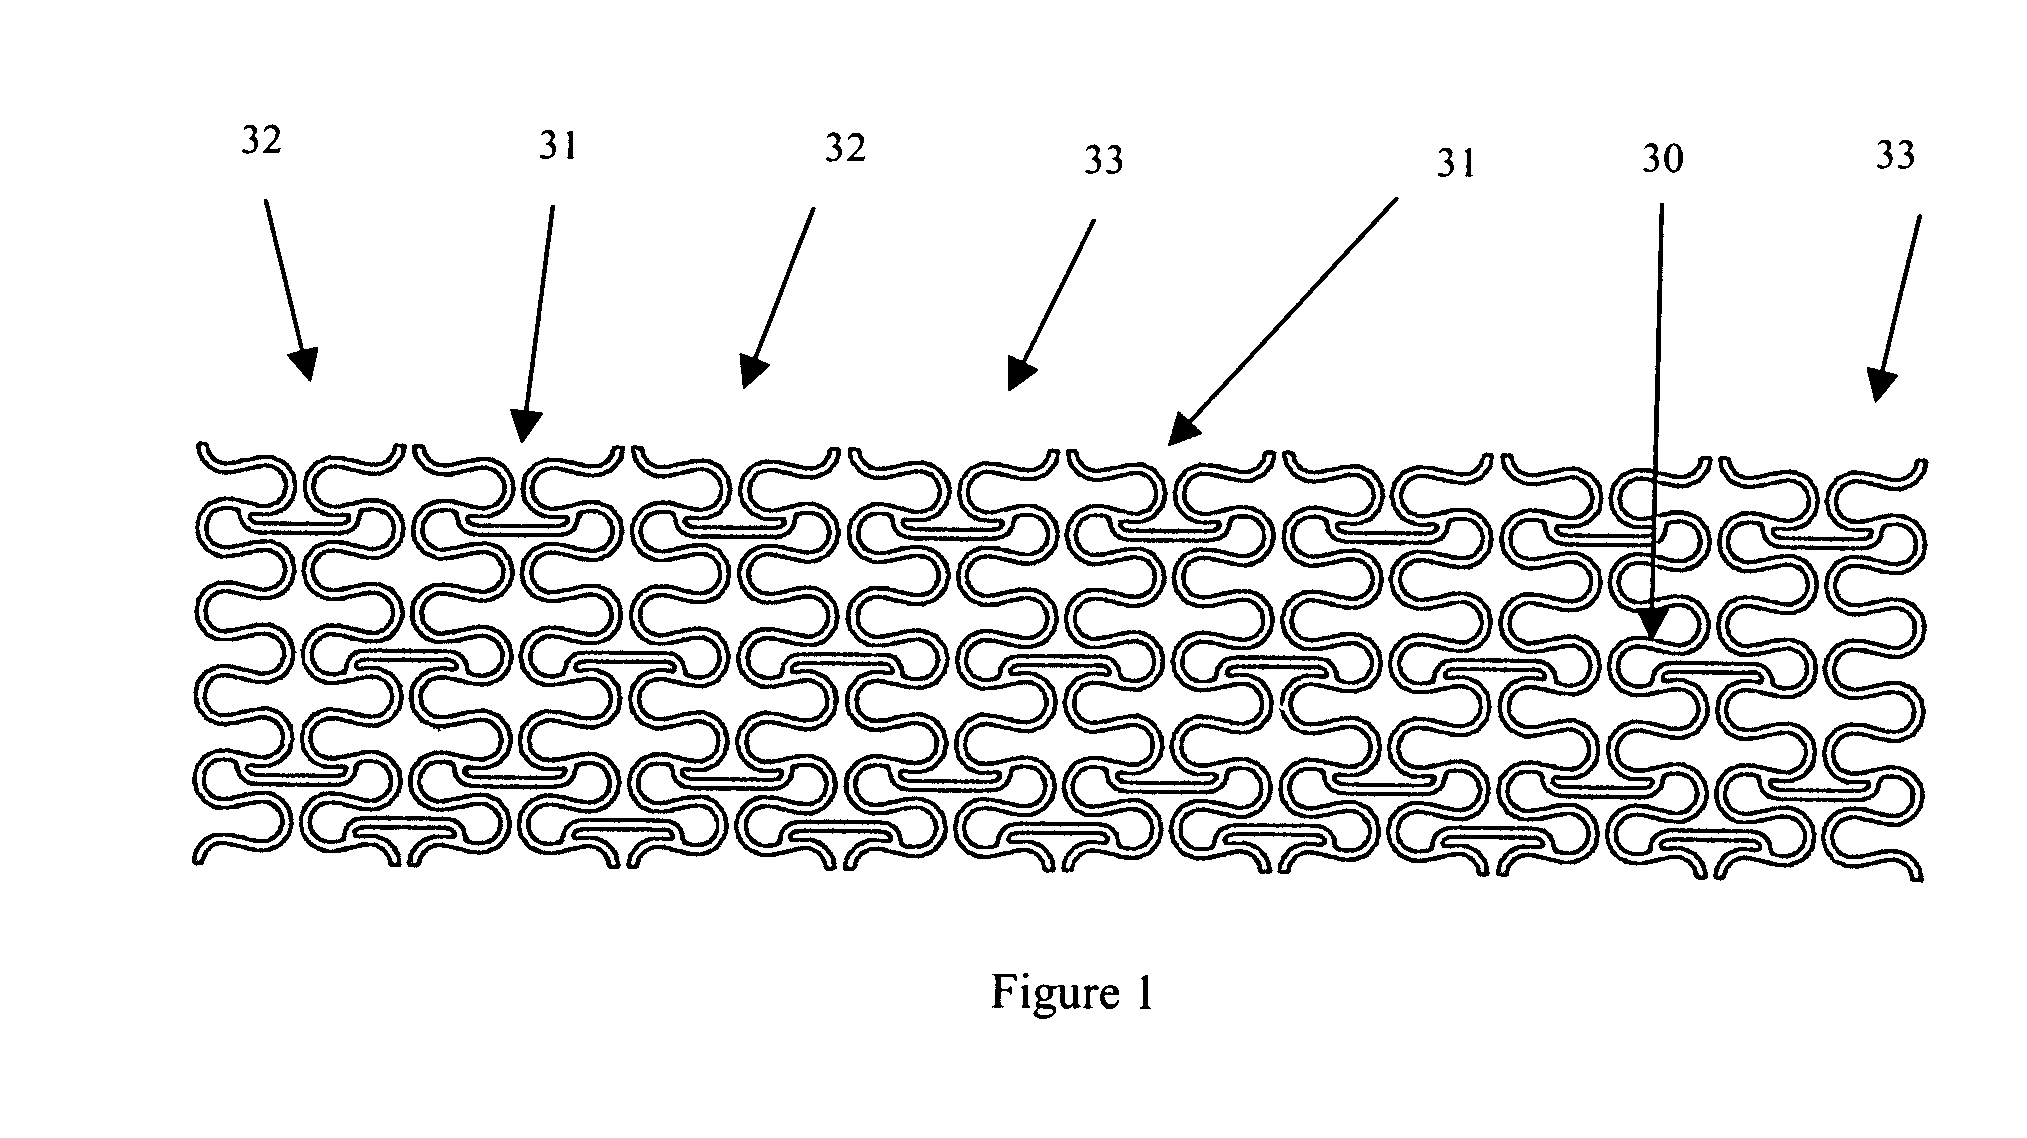 Expandable endovascular stent